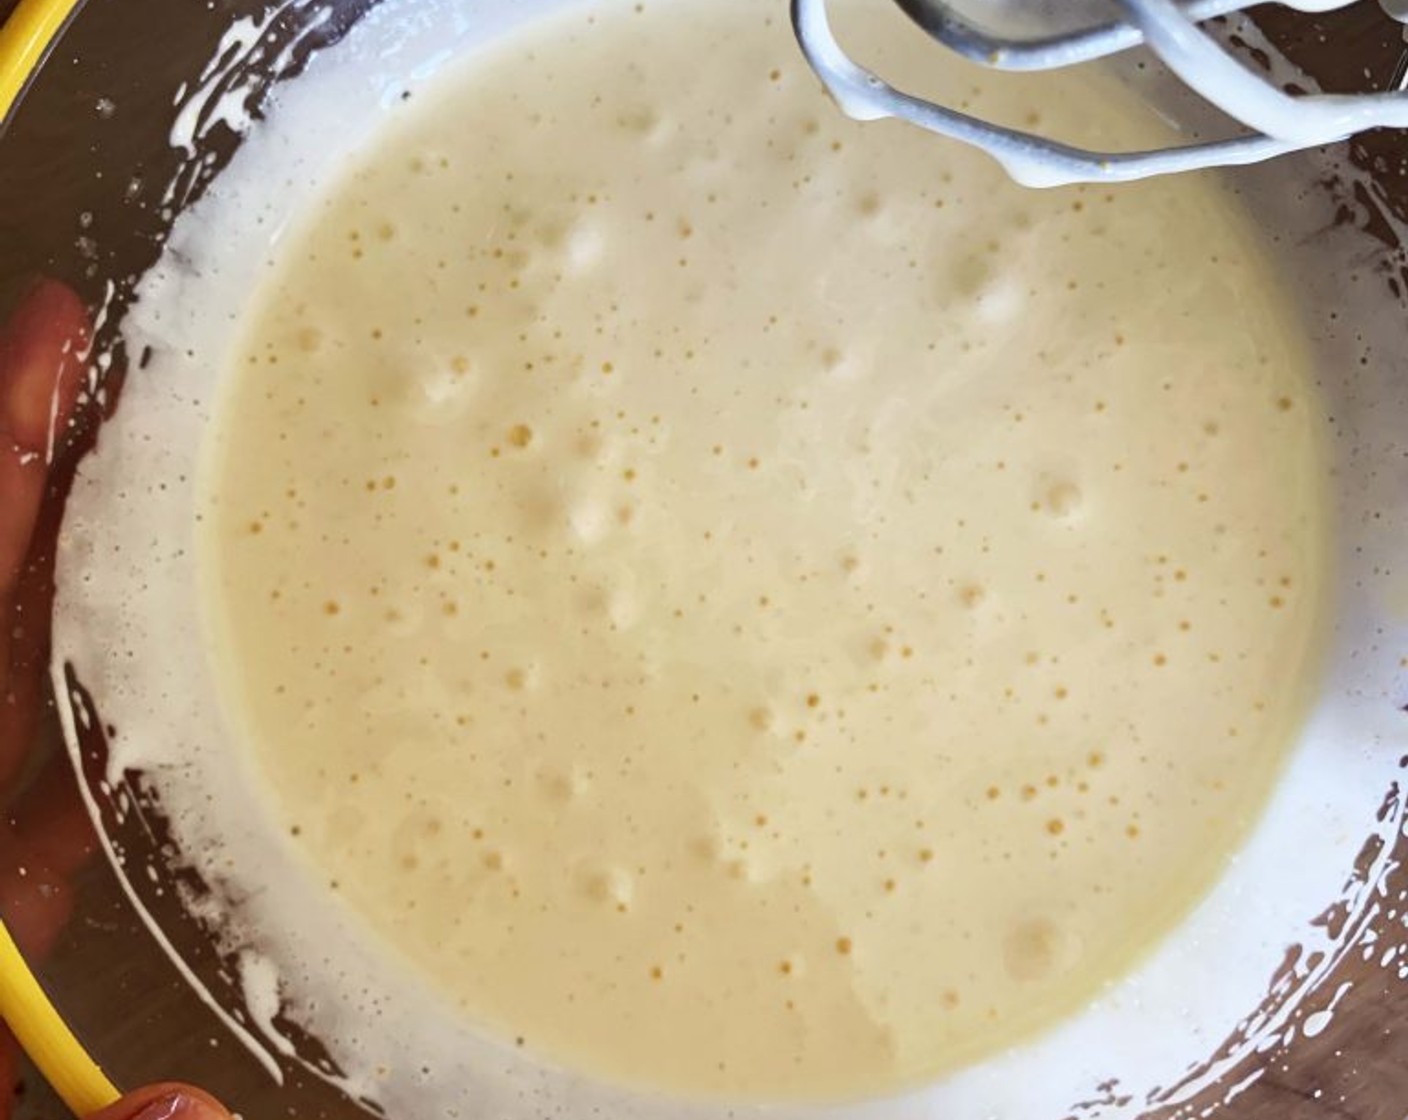 step 2 In a large bowl with a whisk or with an electric mixer beat up Eggs (2), Coconut Sugar (1/2 cup), zest from Orange (1) and Vanilla Extract (1 tsp) for at least 3 minutes. You want to get a foamy and airy mixture.